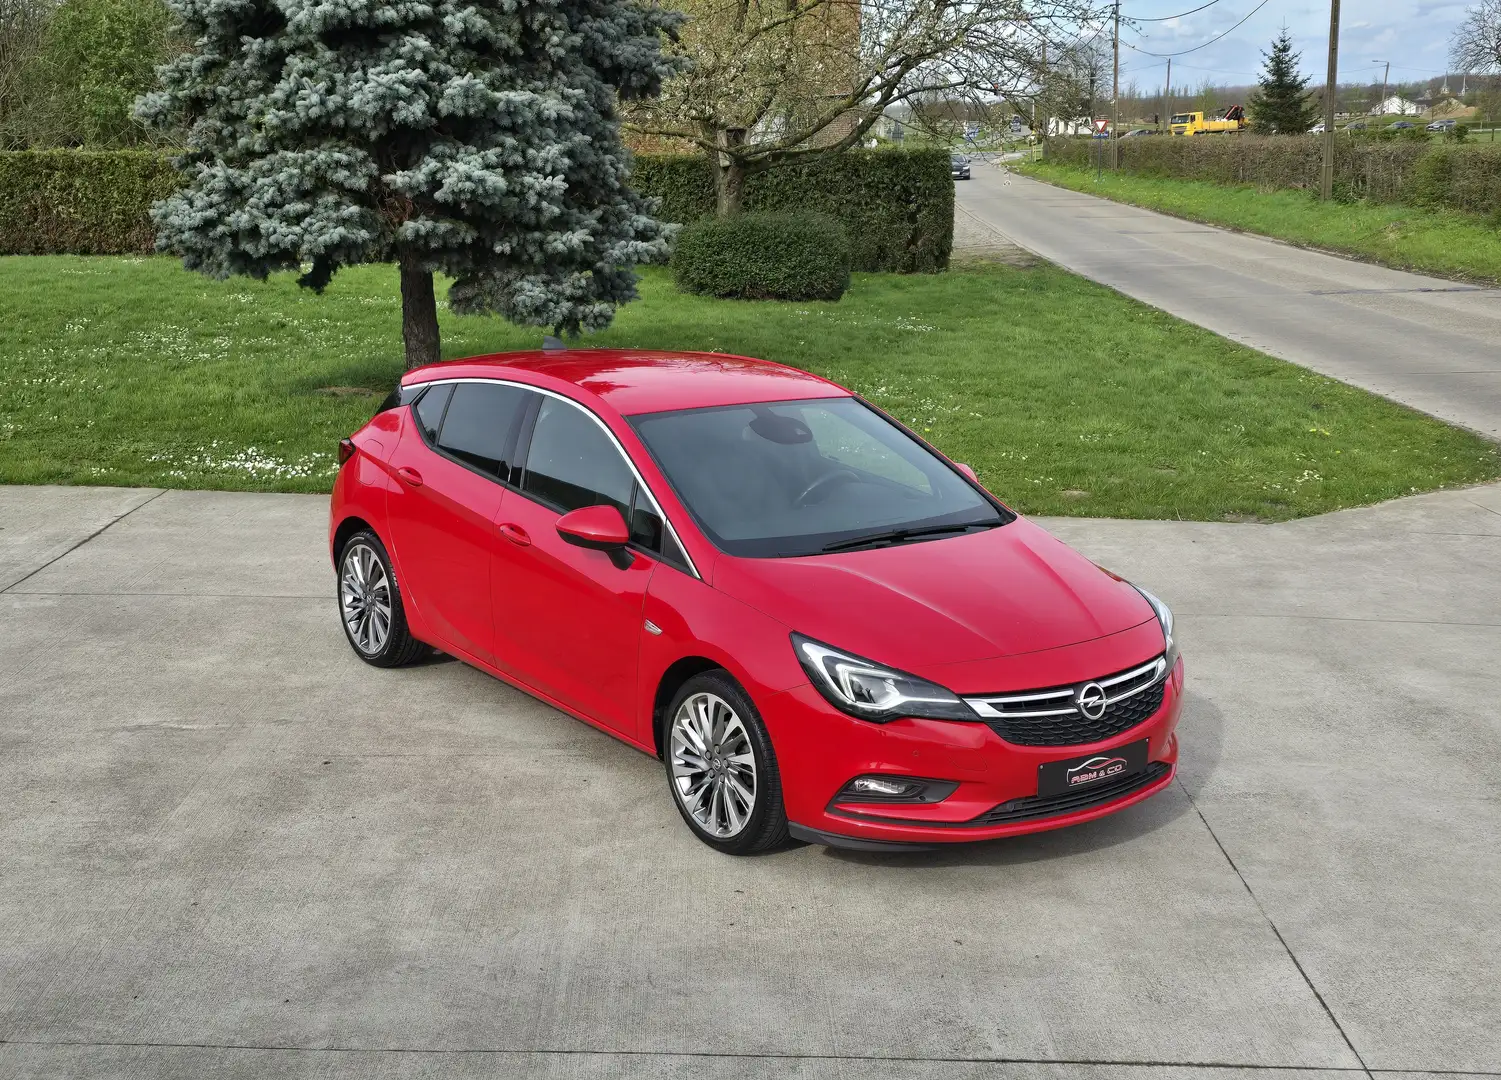 Opel Astra 1.4i Turbo 150 cv ** LED - Cuir - Caméra ** Rouge - 1